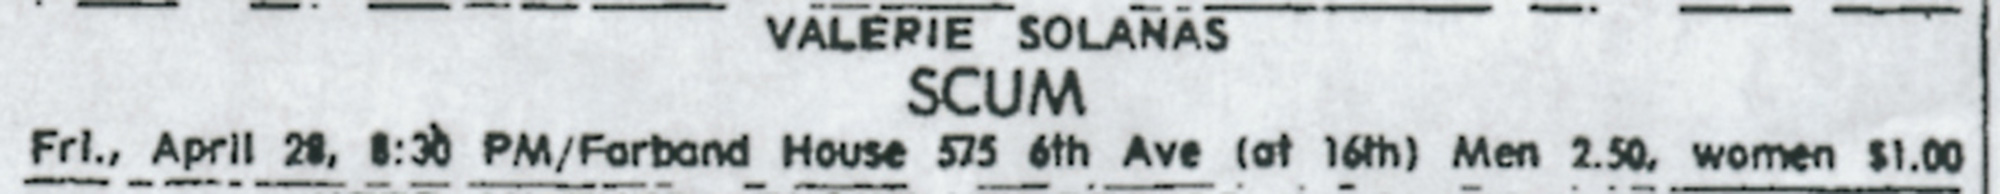 SCUM advertisement in the classifieds of the 27 April 1967 issue of The Village Voice.